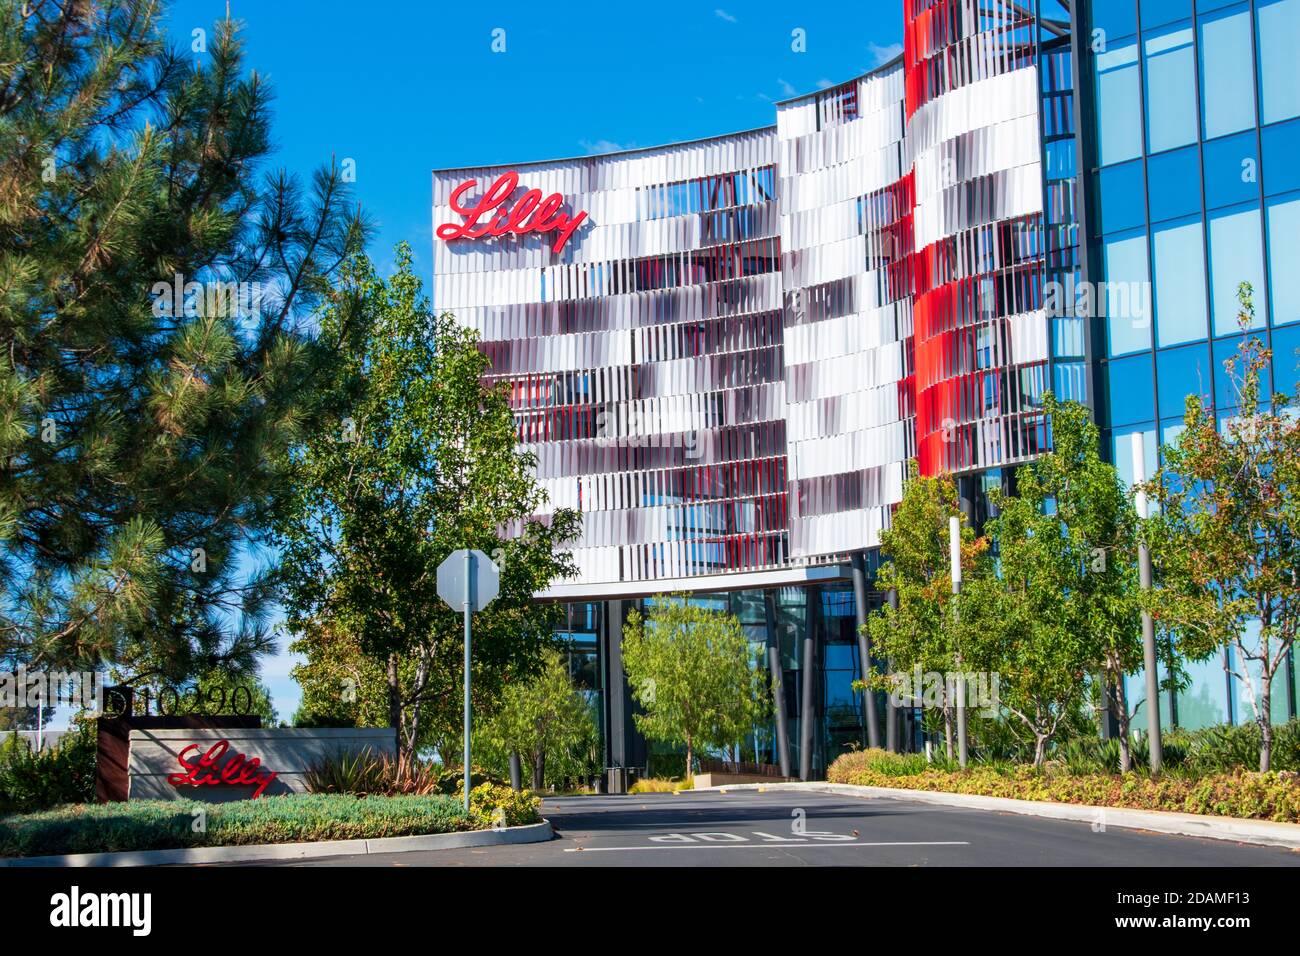 Lilly Biotechnology Center campus of an American pharmaceutical company Eli Lilly and Company - San Diego, California, USA - 2020 Stock Photo